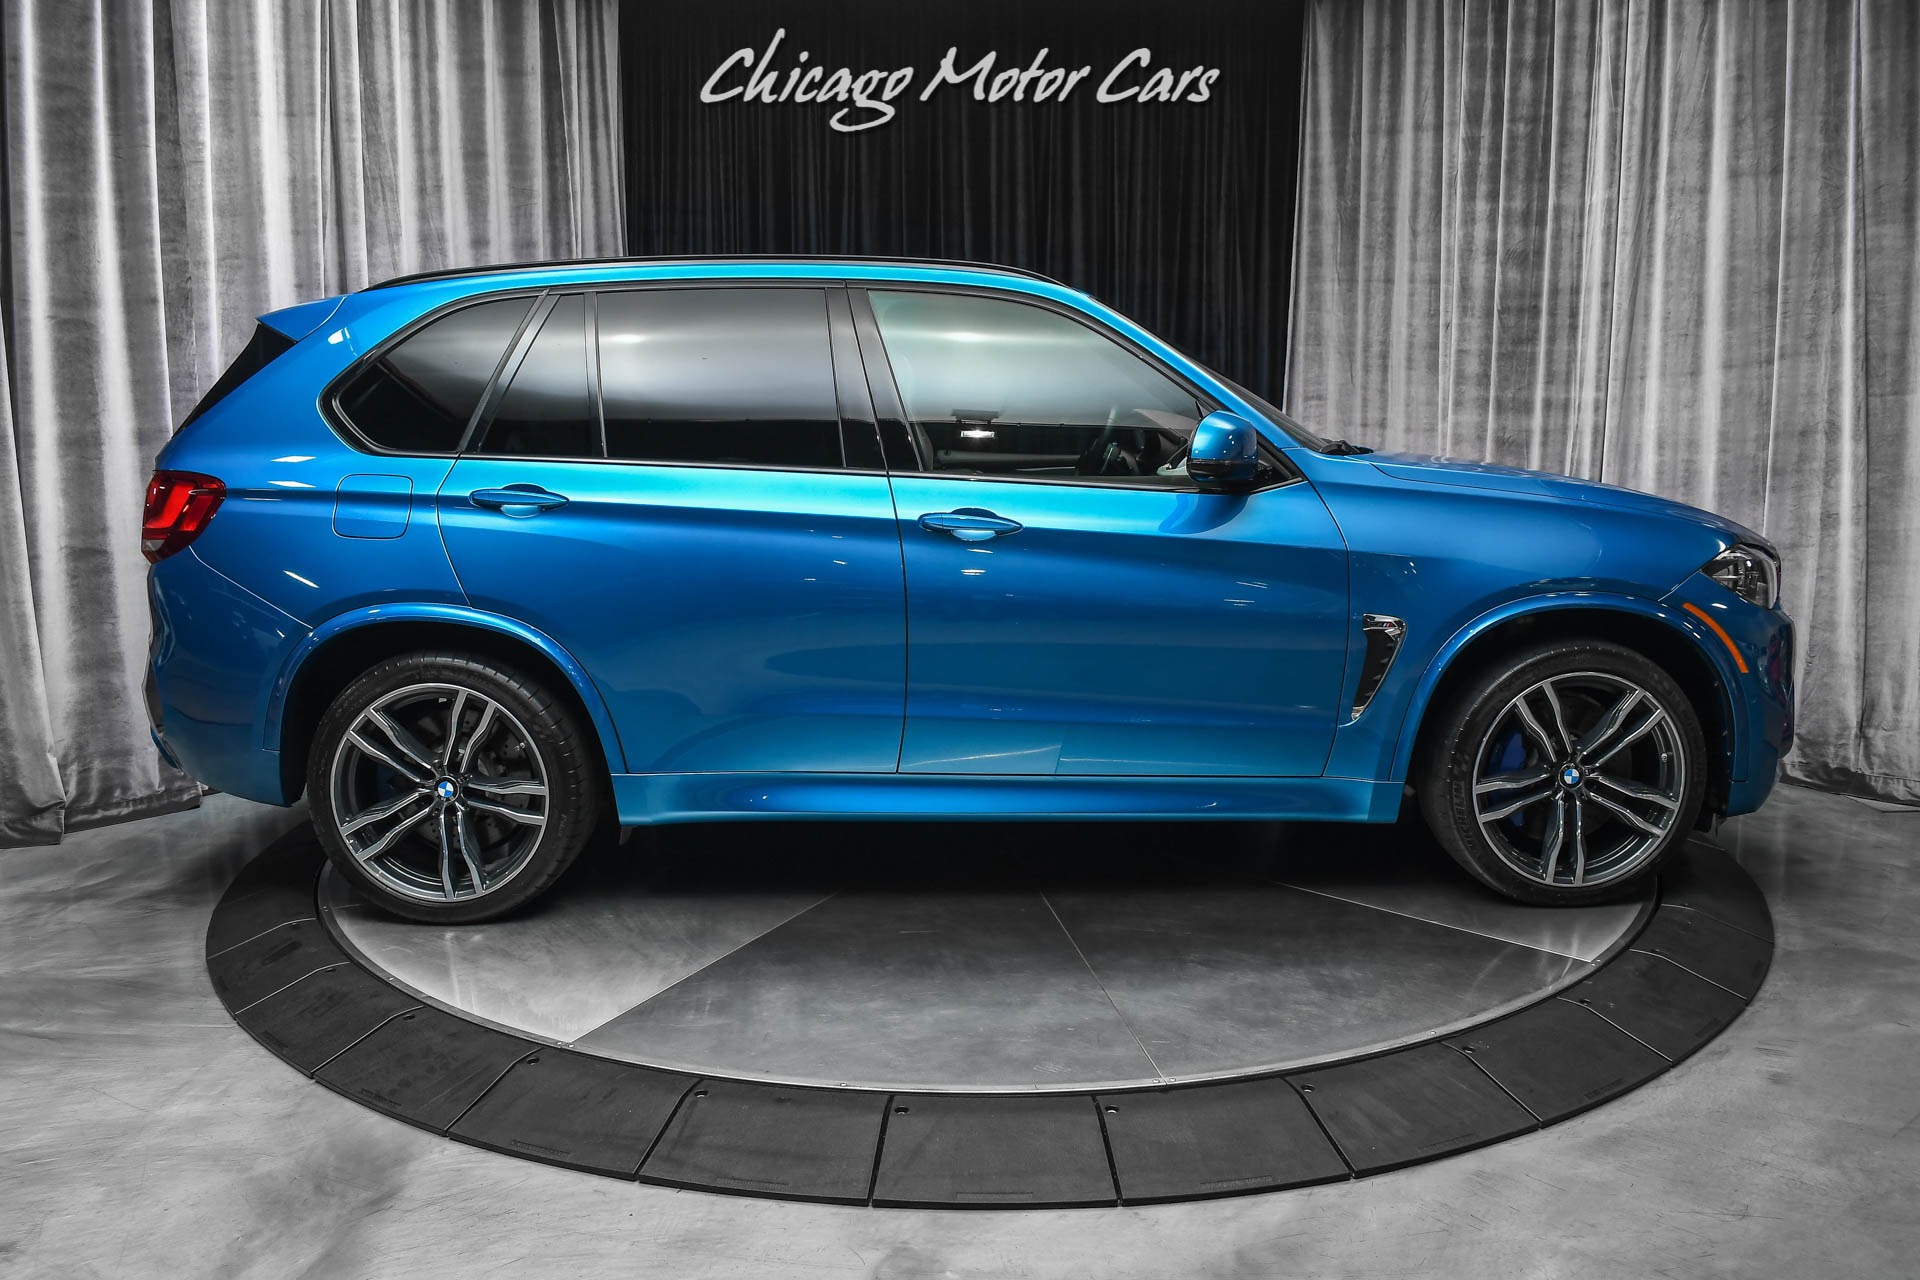 Used 2018 BMW X5 M SUV MSRP $114,695+ Executive Package! Bang & Olufsen  Sound! Apple CarPlay! For Sale (Special Pricing) | Chicago Motor Cars Stock  #18492